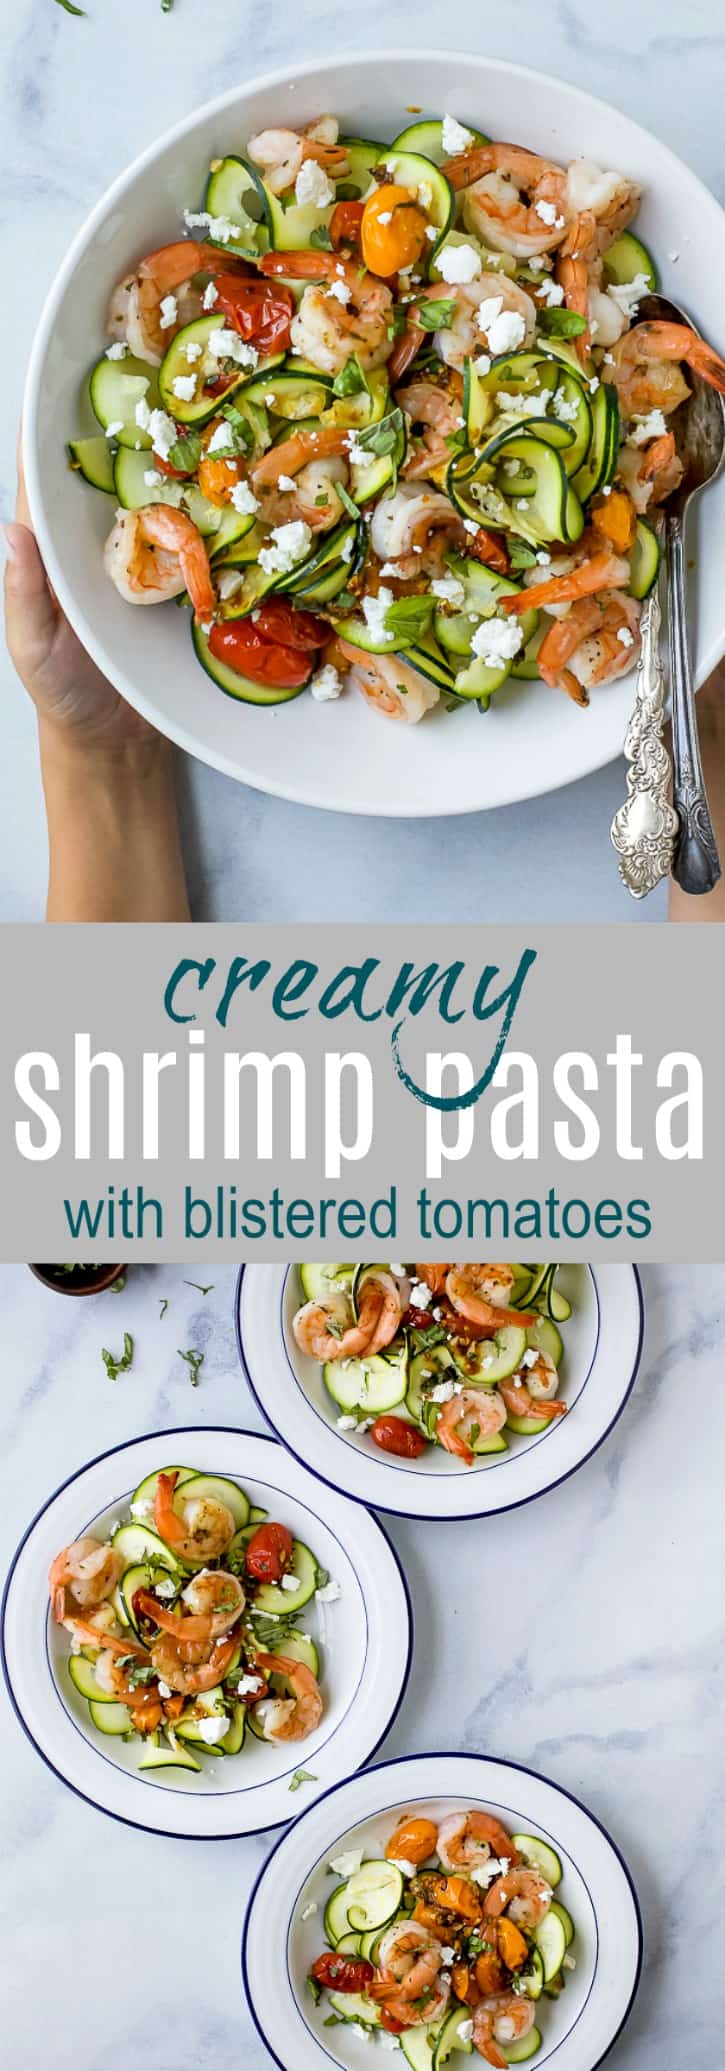 Collage for Creamy Shrimp Pasta tossed with Blistered Tomatoes recipe